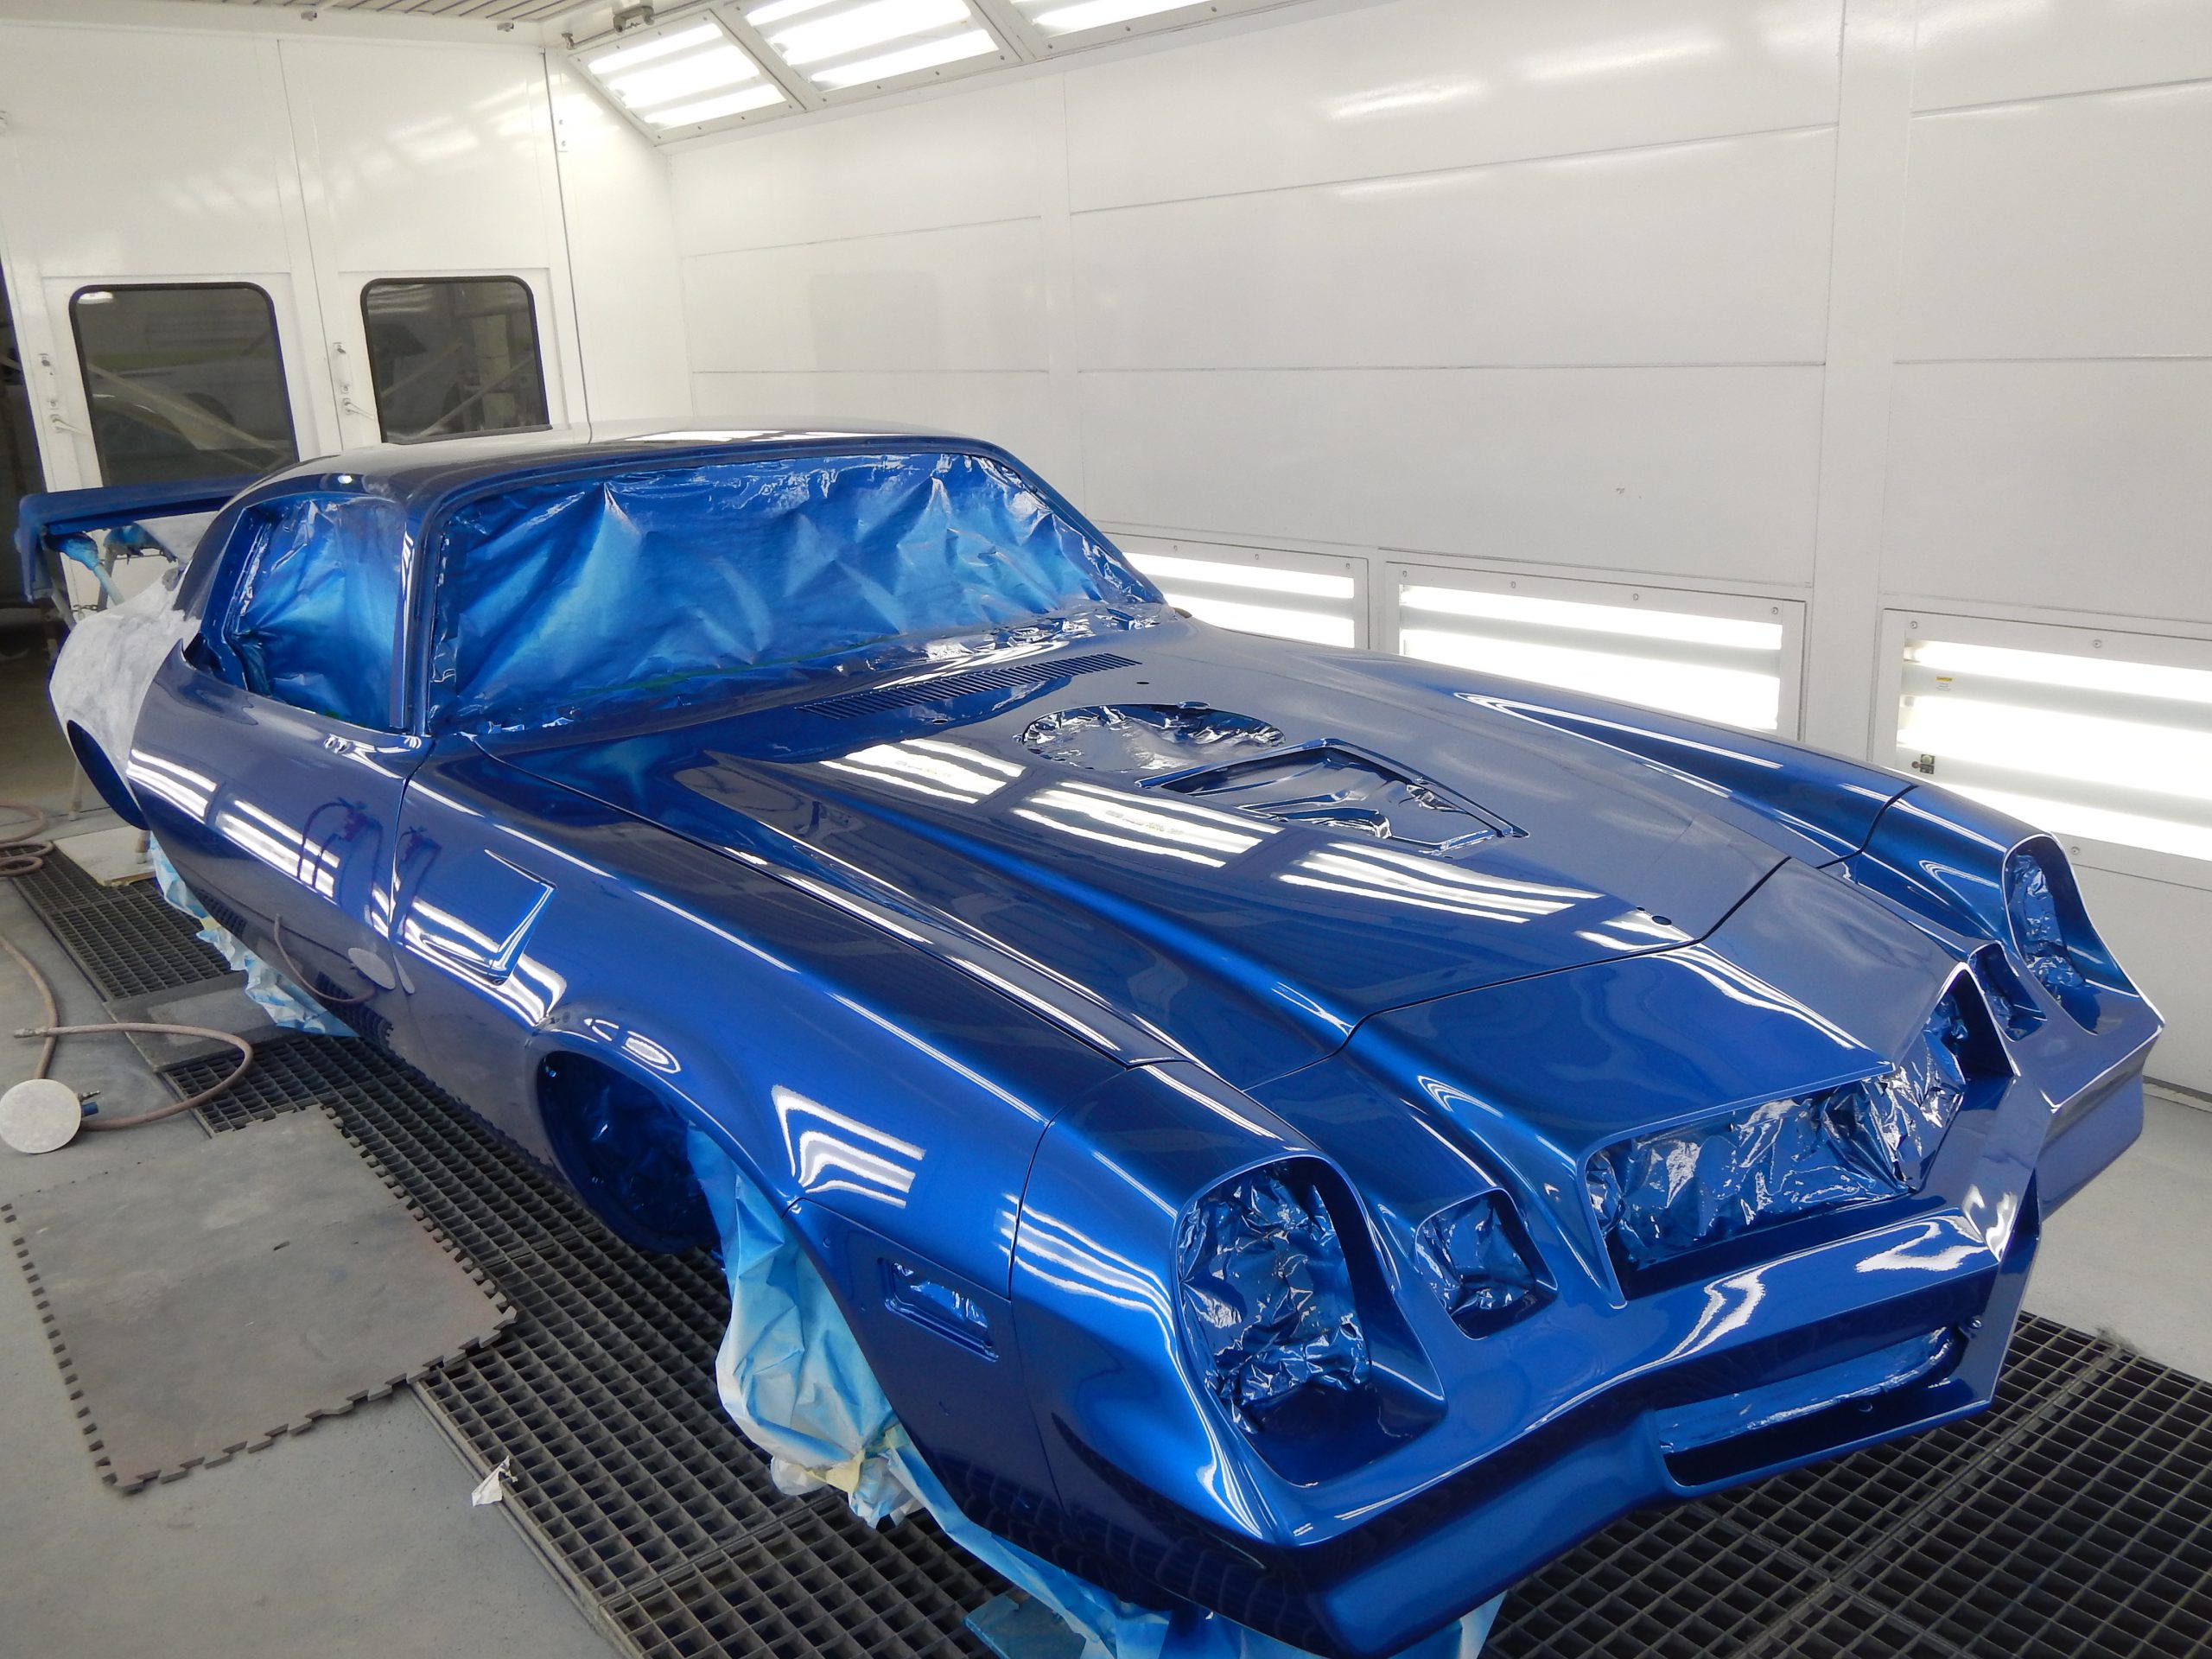 Automotive Painting & Finishing - That's Minor Customs - Classic Car  Restoration  Hot Rods, Classics, Muscle Cars & Customs - Custom Painting,  Mechanical Restoration & Upholstery in Clinton Township & Sterling Heights  Michigan